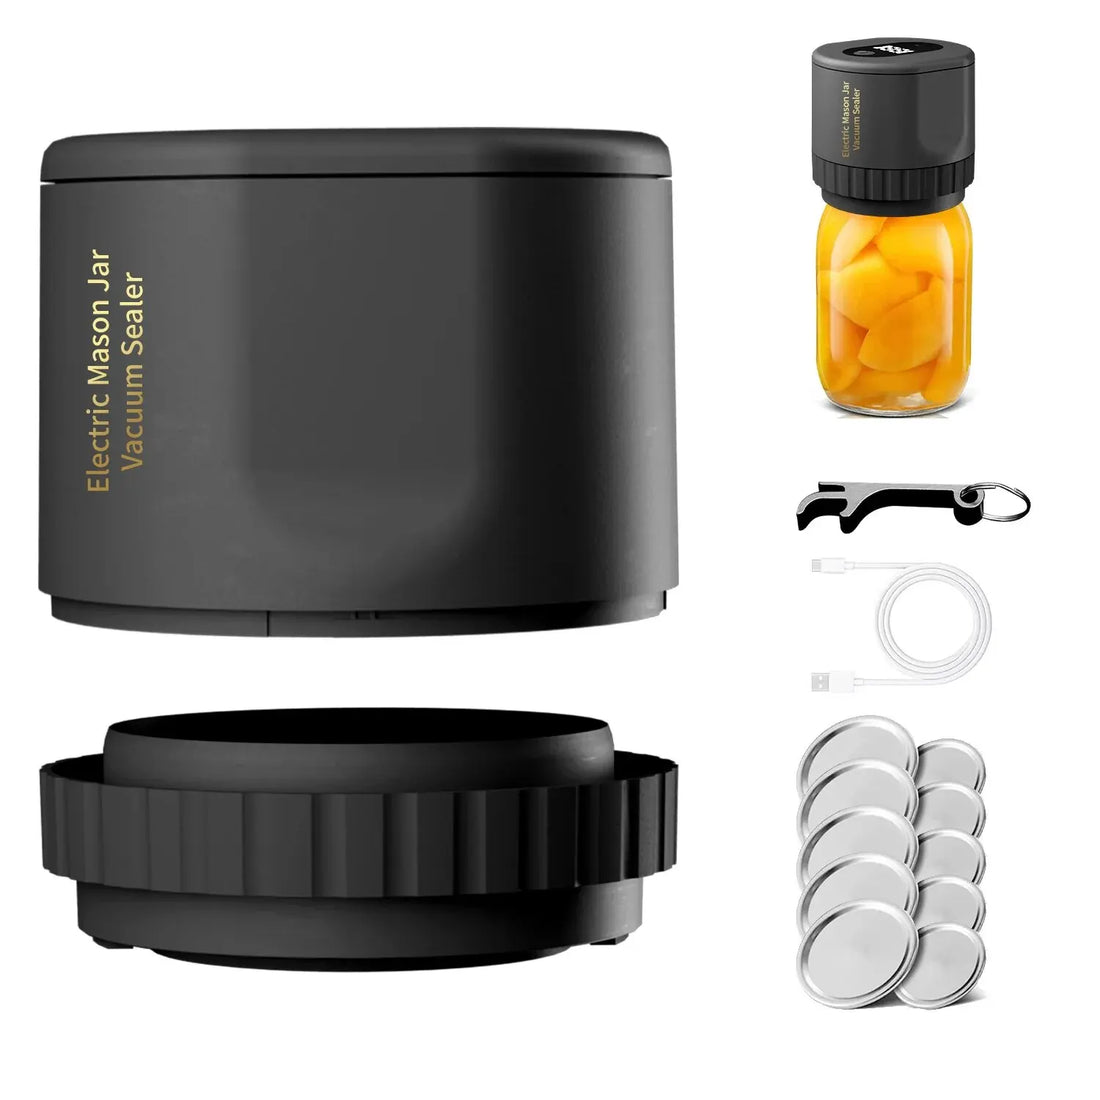 Soulful Trading Electric Mason jar vacuum sealer with accessories including a handheld pump, jar with preserved food, seal freshness caps, and connecting hose.